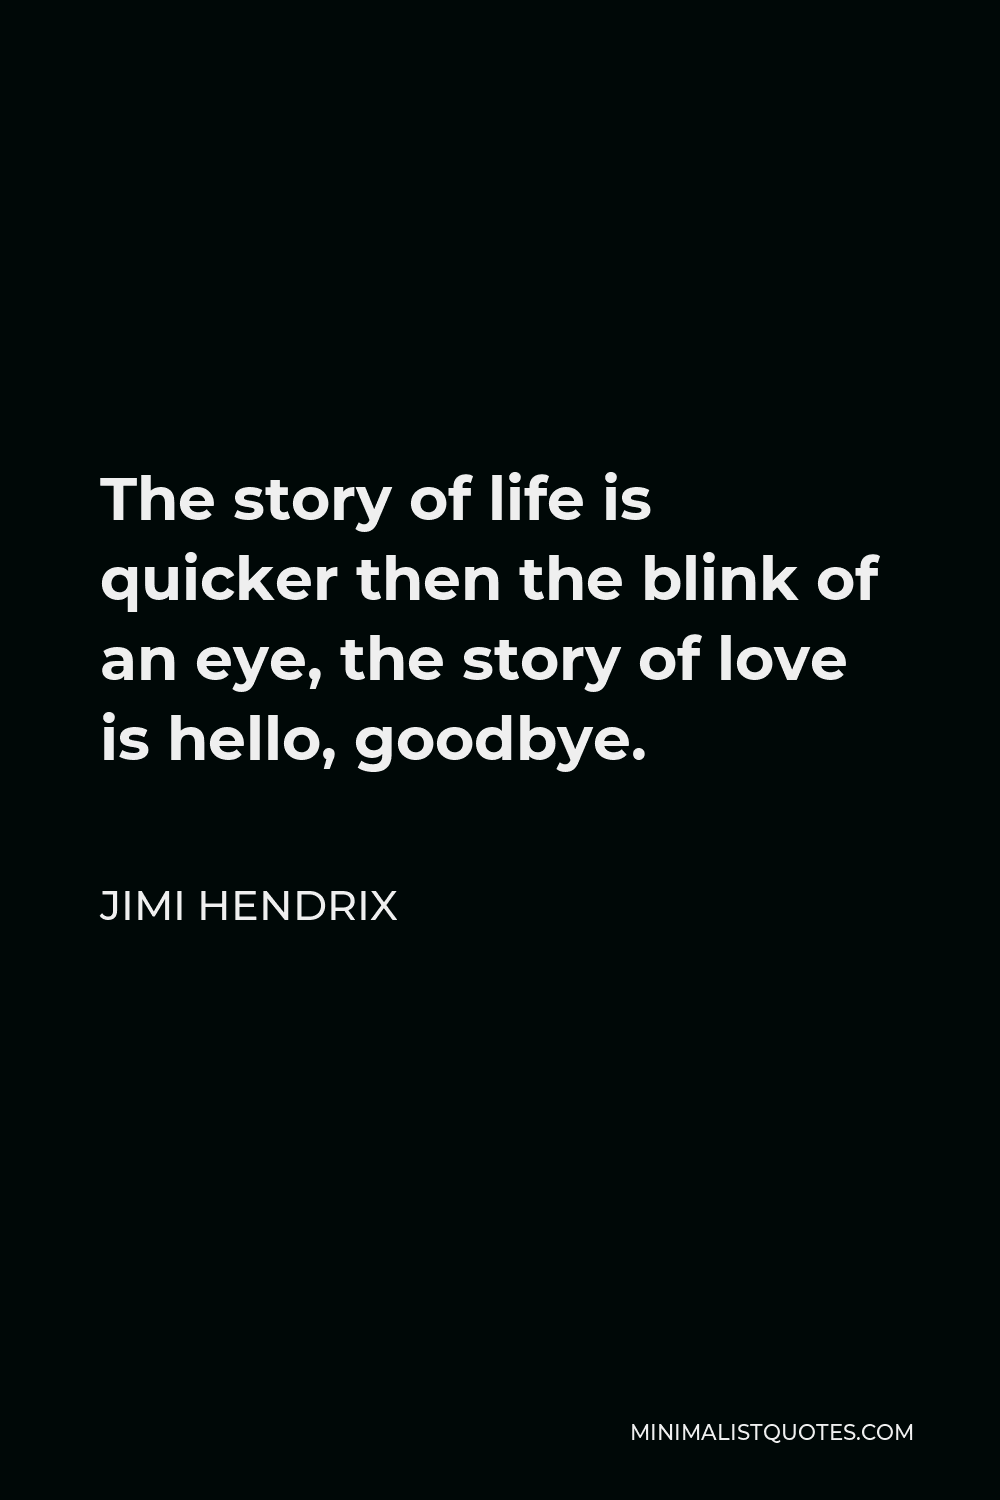 Jimi Hendrix Quote - The story of life is quicker then the blink of an eye, the story of love is hello, goodbye.